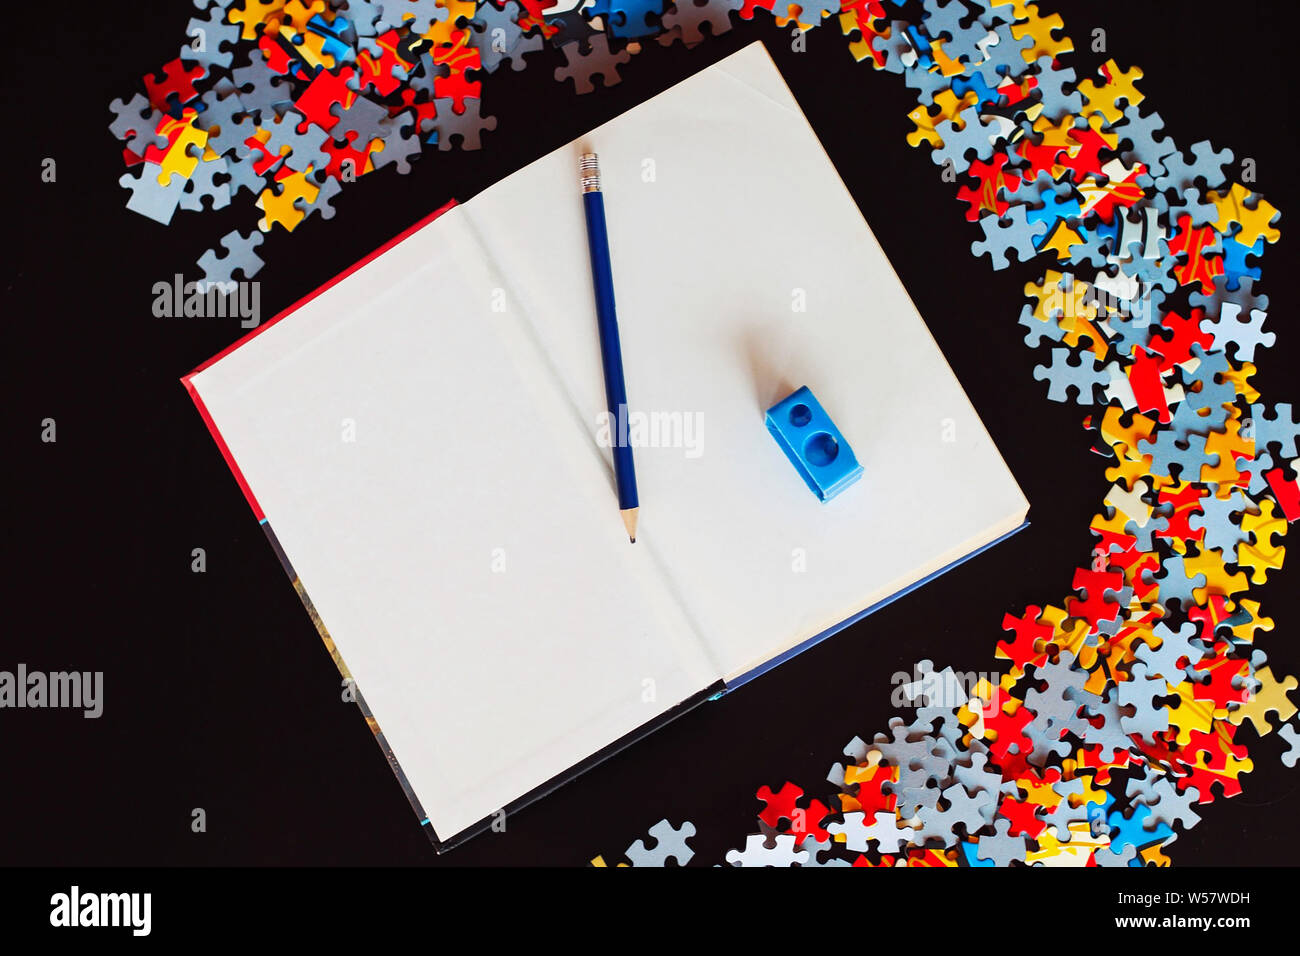 Blank book with pencil and sharpeners next to puzzle pieces. Stock Photo